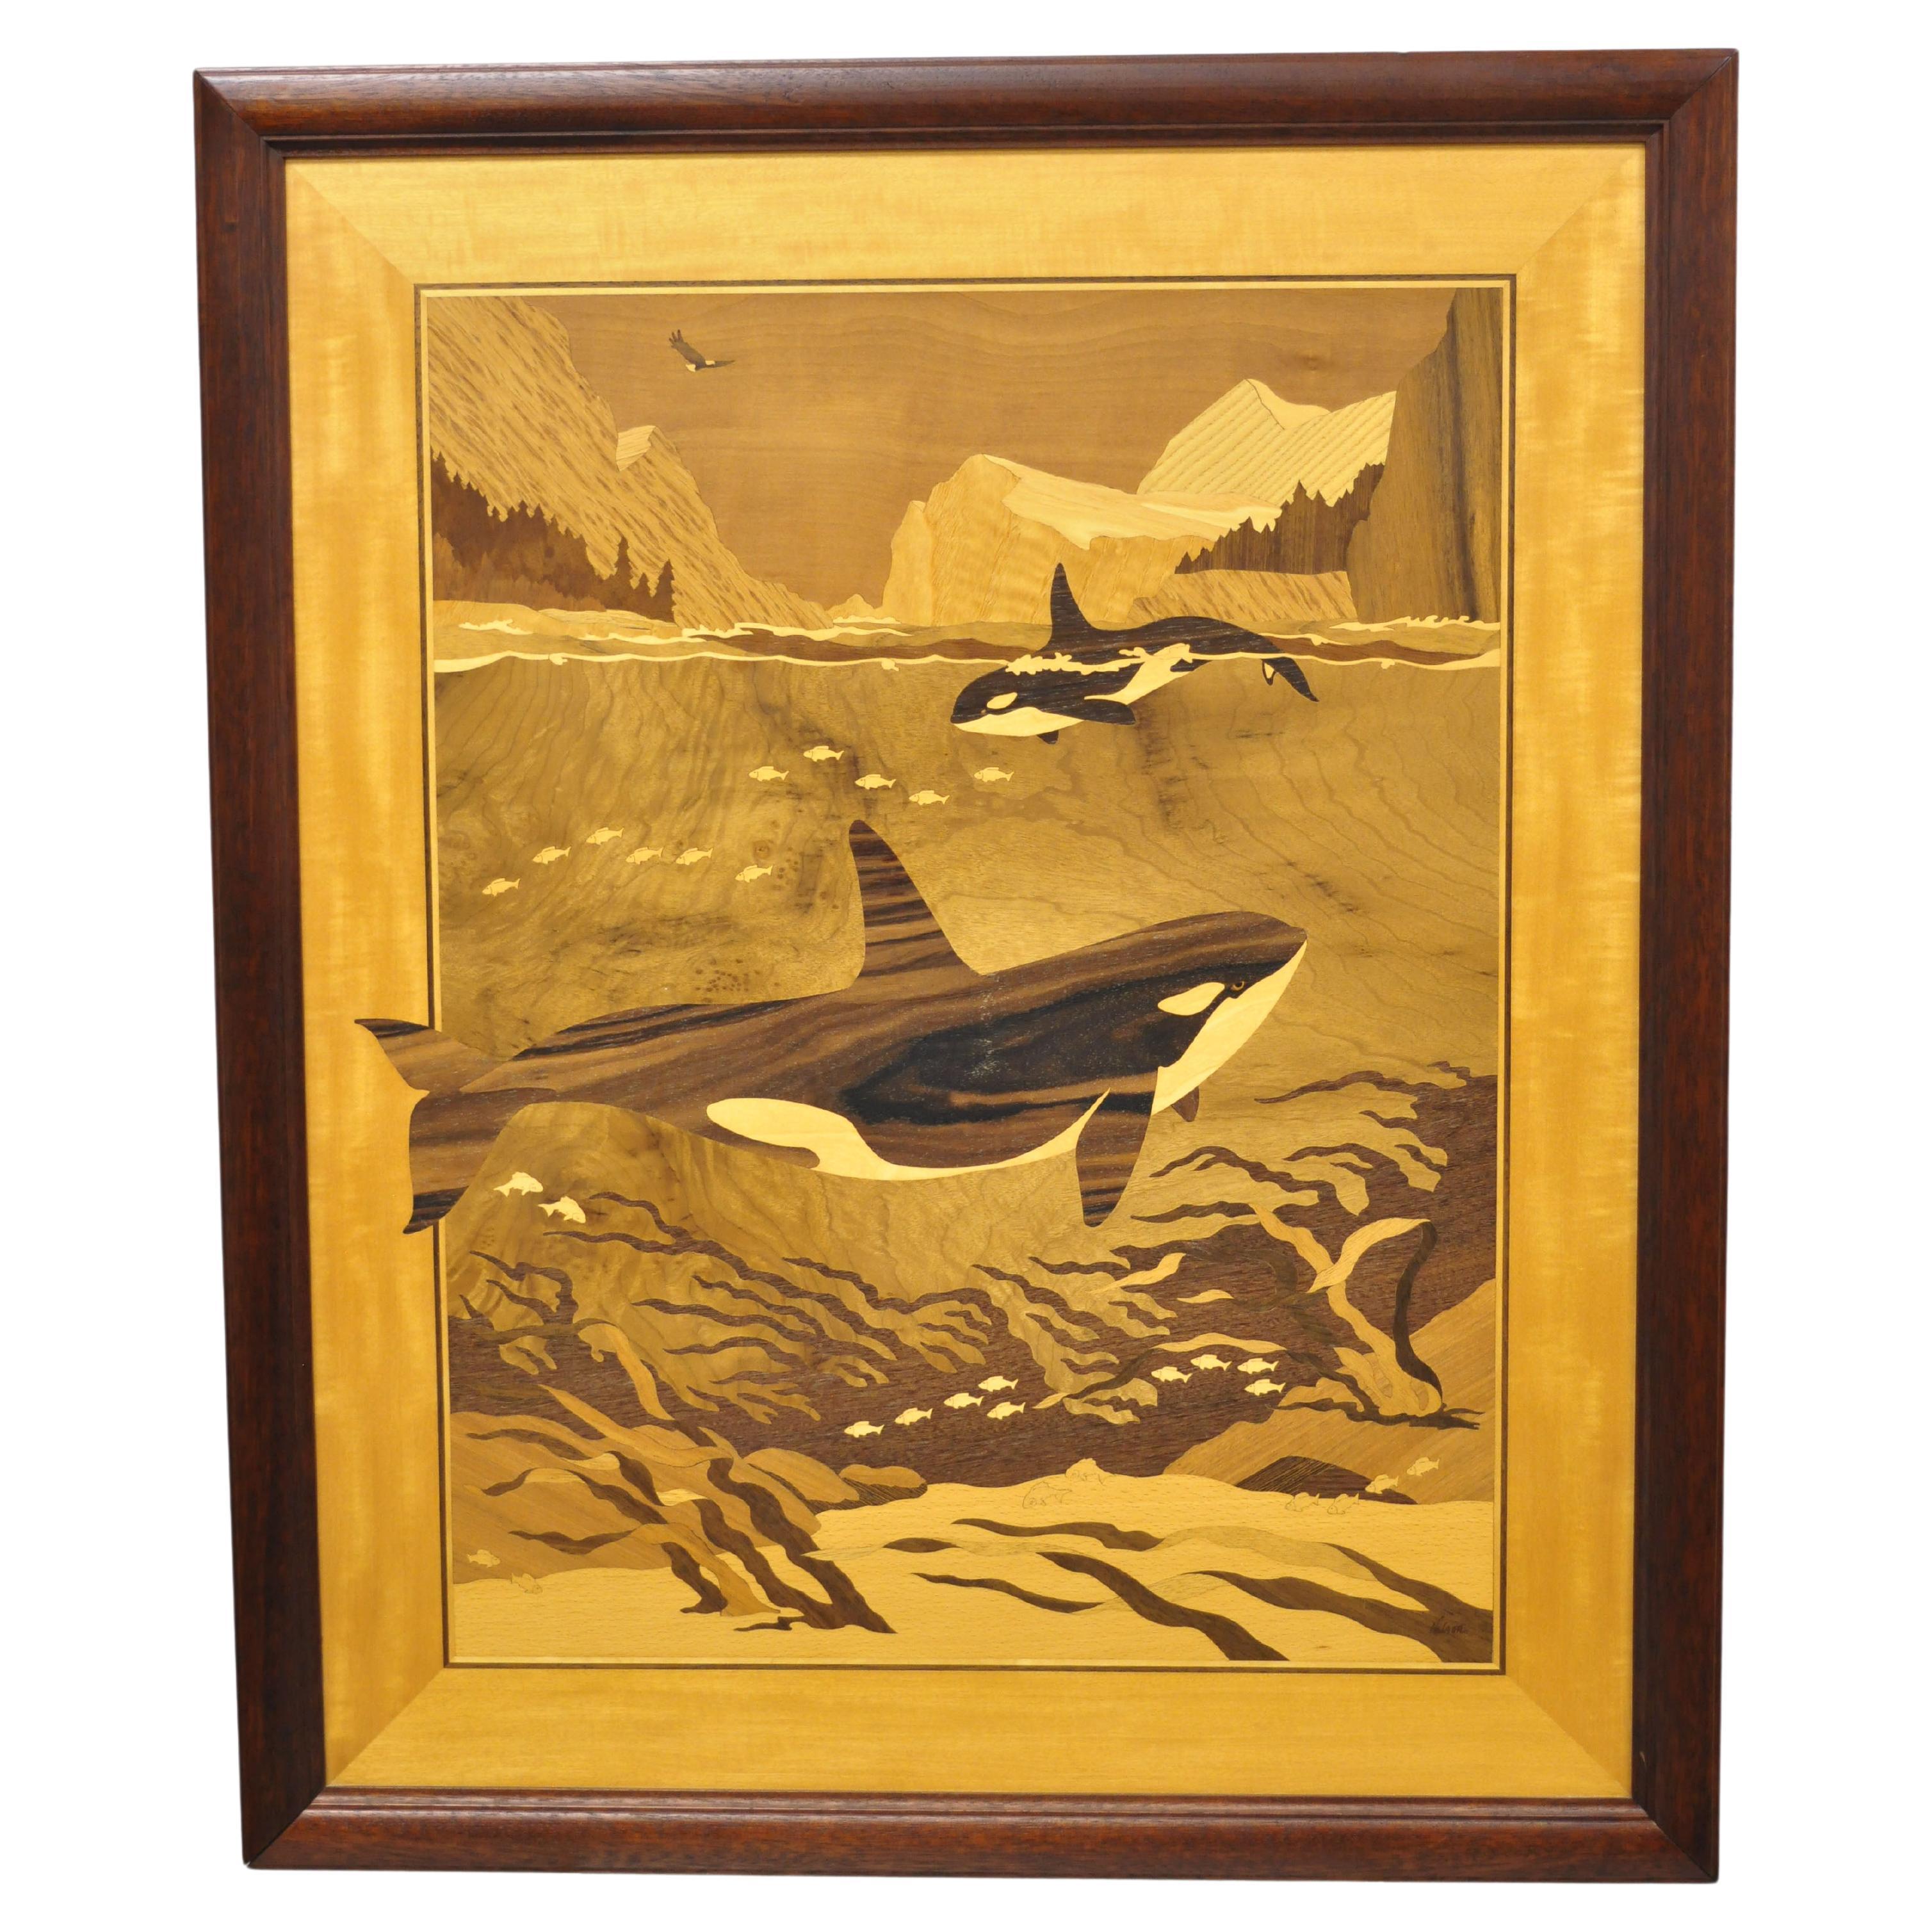 Hudson River Inlay Orcas Killer Whales Nature Sea Marquetry Inlaid Wall Artwork